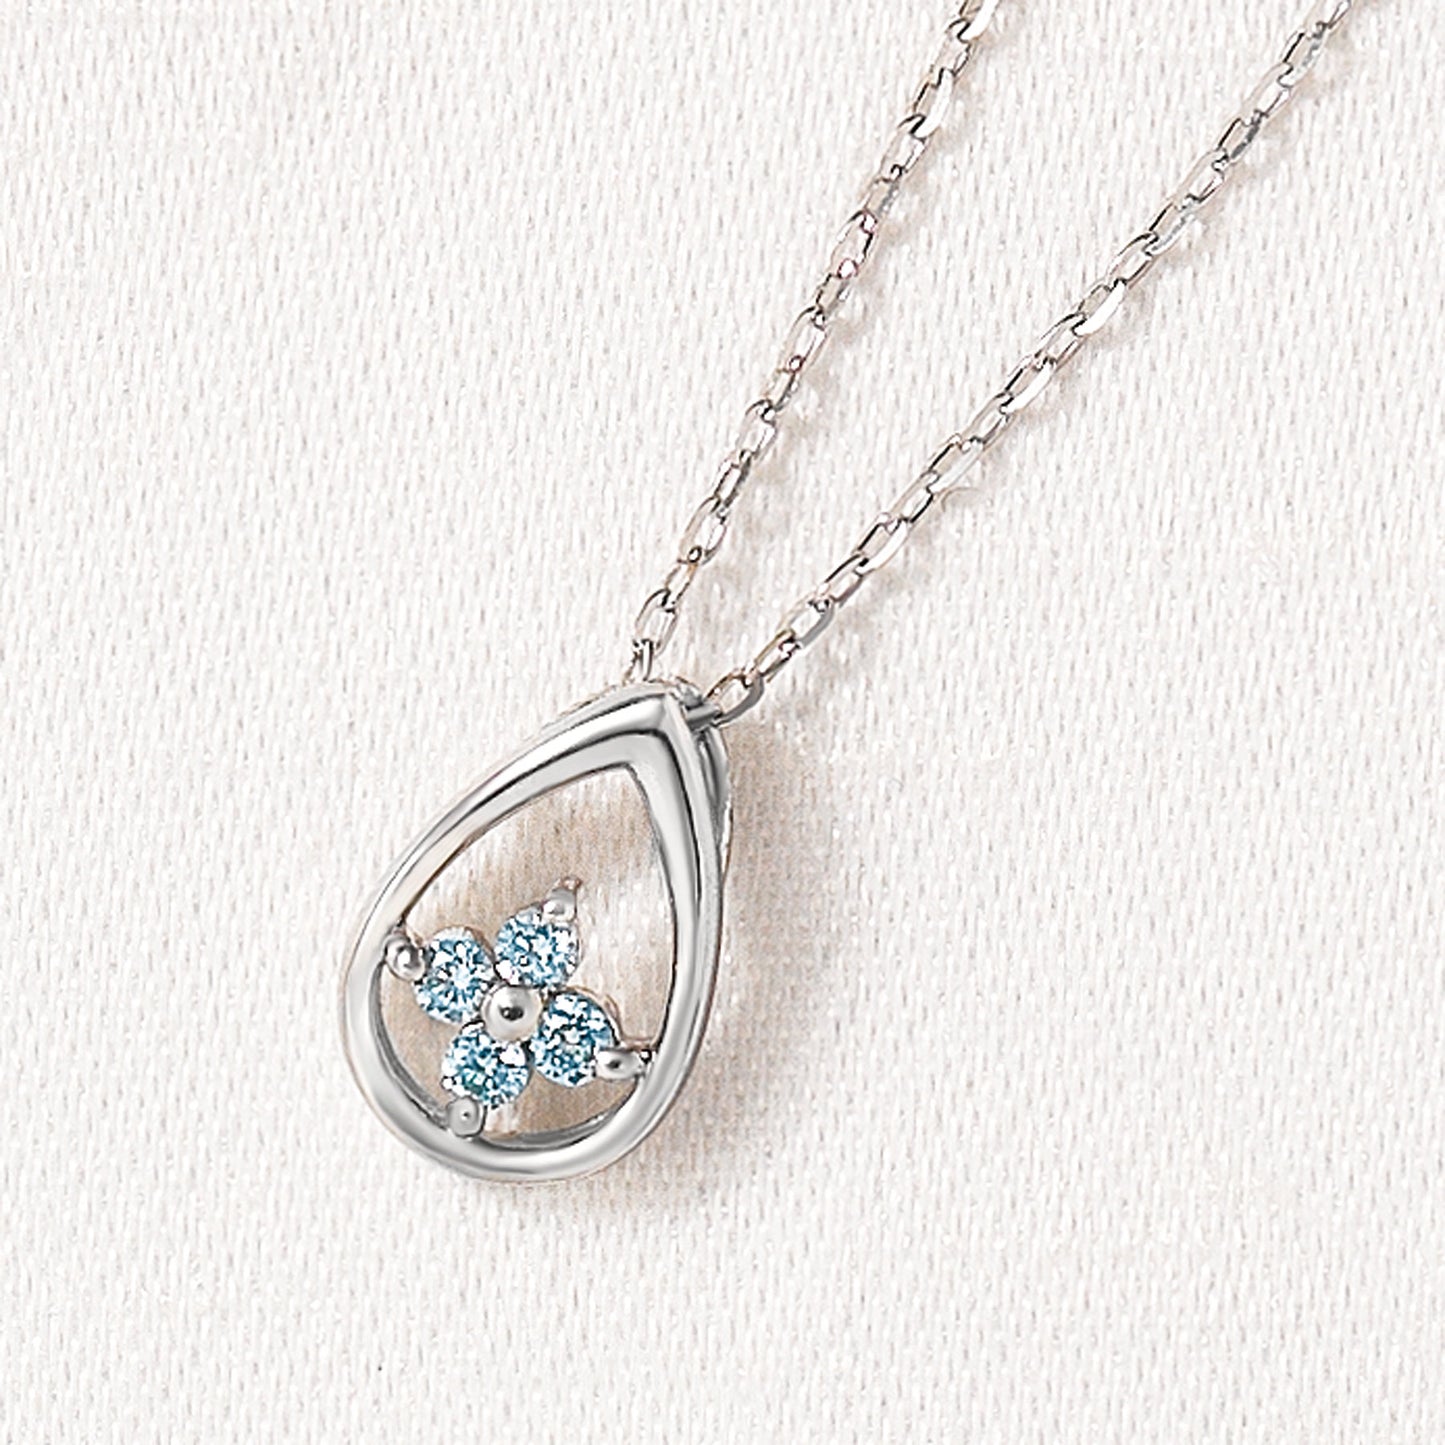 10K White Gold Ice Blue Diamond Dew Drop Clover Necklace - Product Image